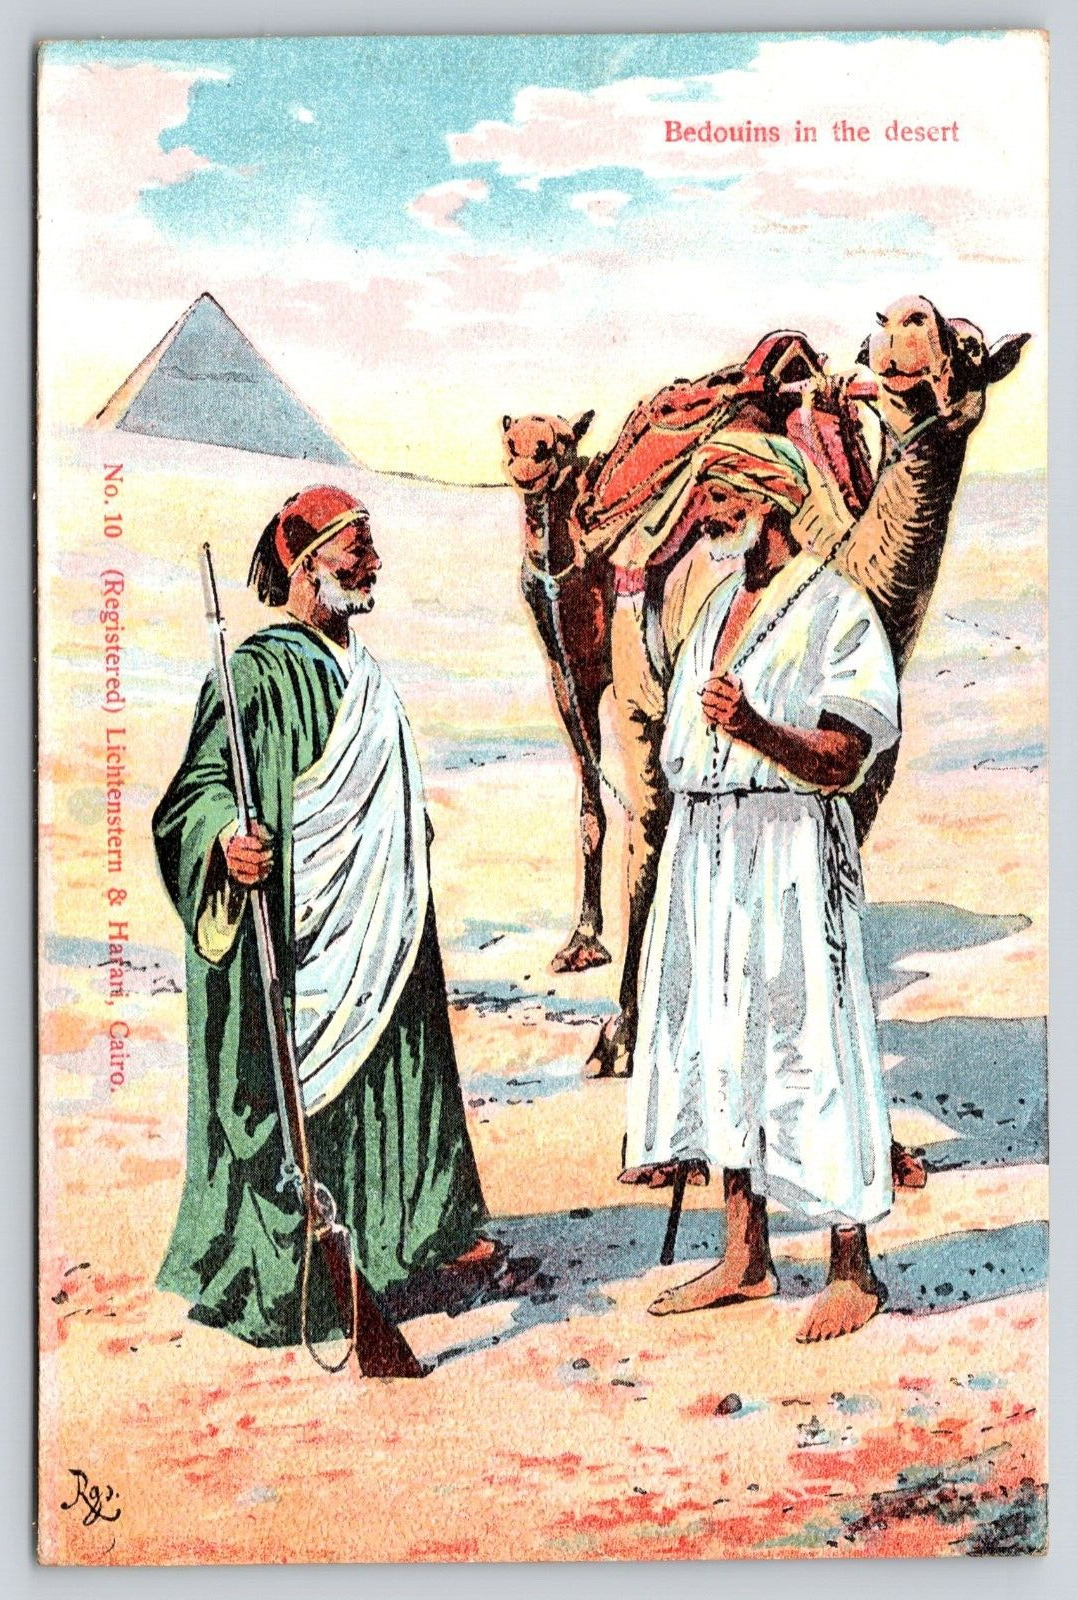 Bedouins Nomads in the Desert Long Rifle Camel Pyramid Cairo Egypt Postcard